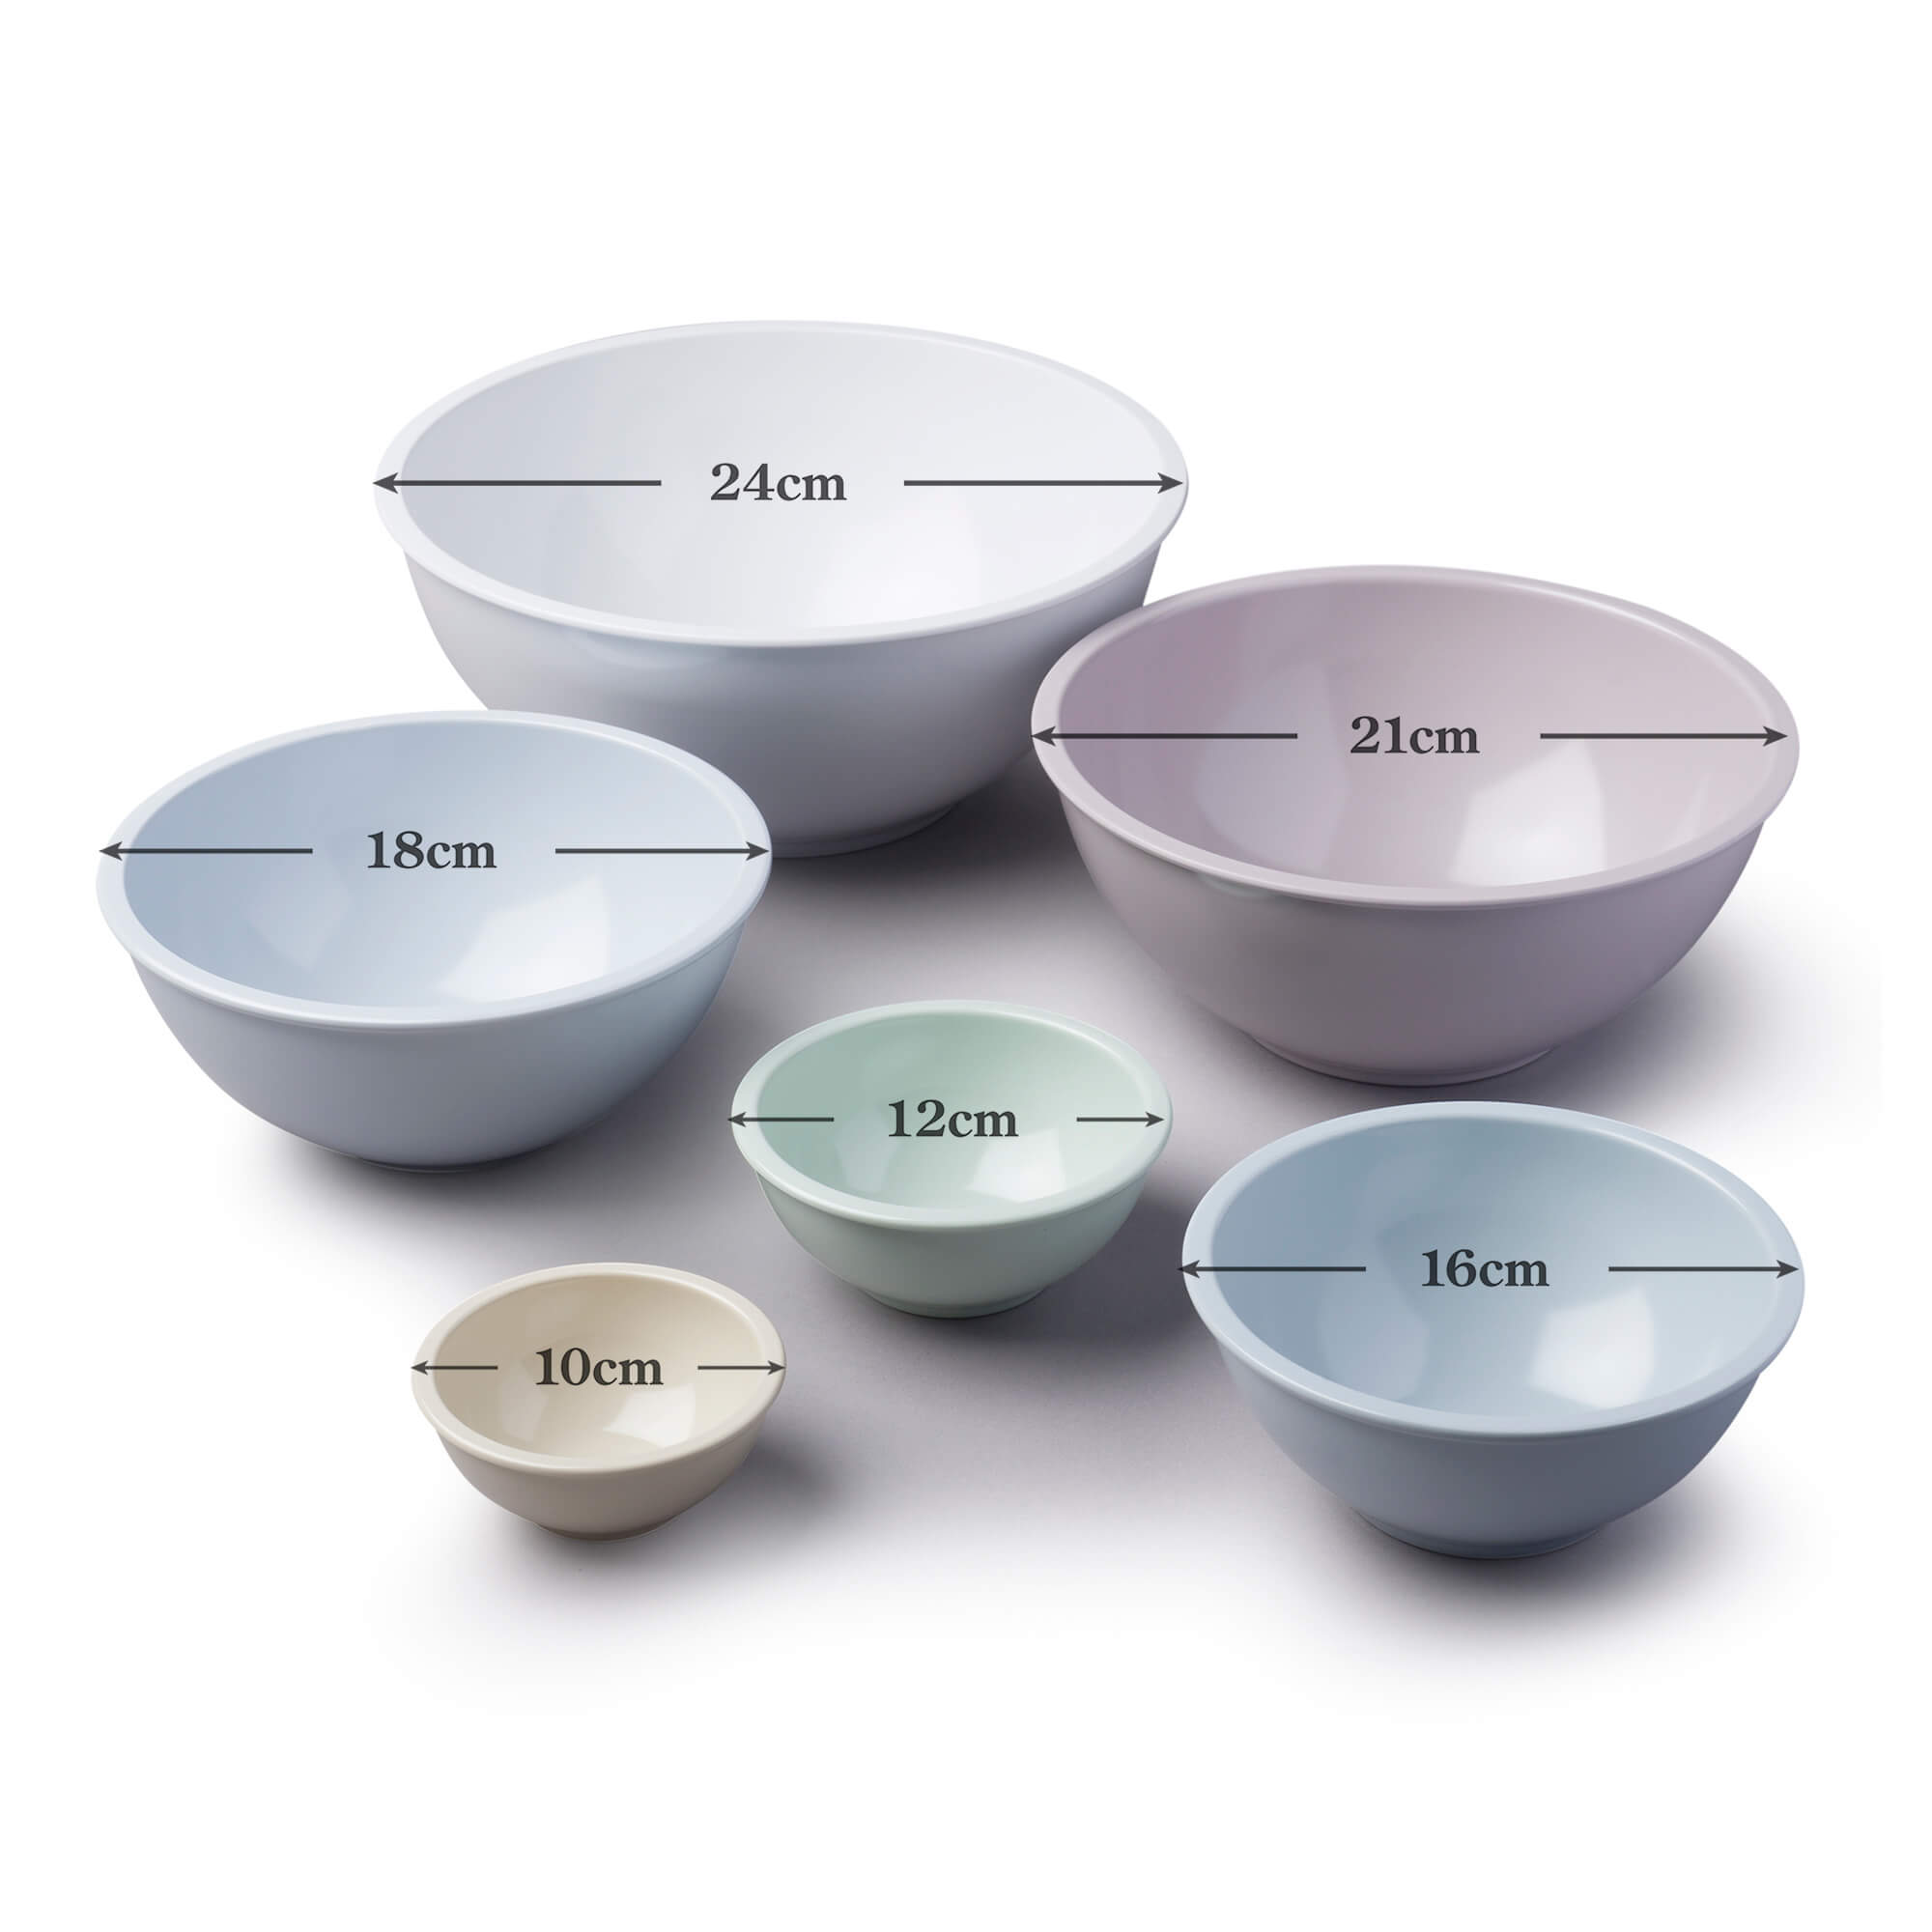 Zeal Set of 6 Melamine Round Nesting Bowls in Classic Colours dimensions